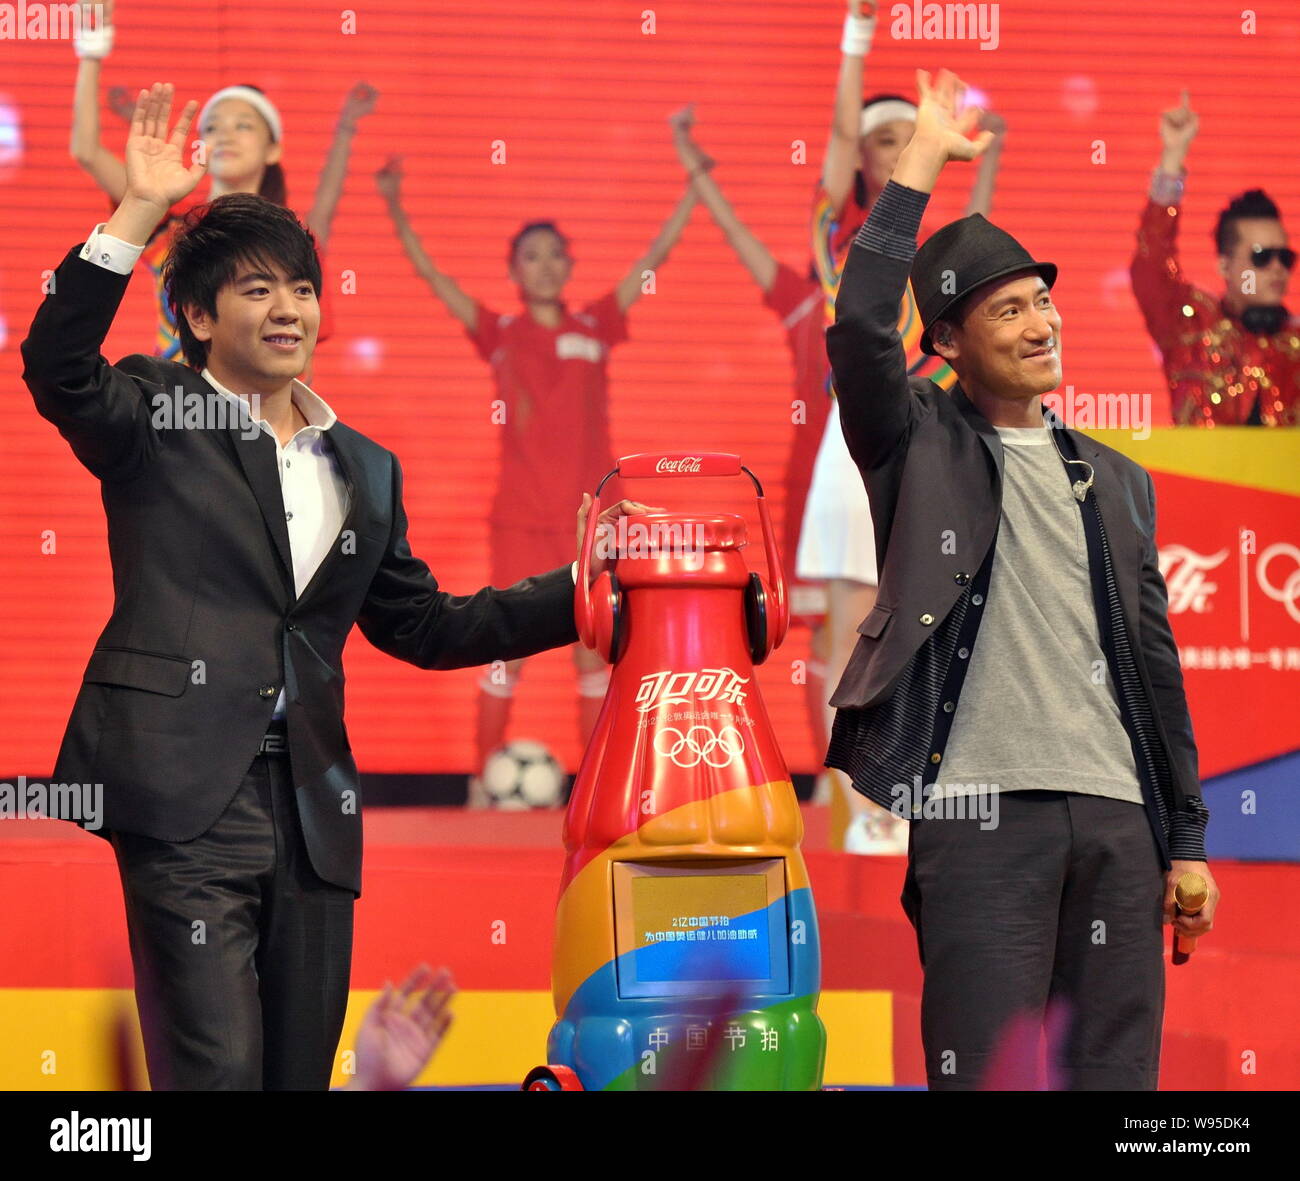 Chinese pianist Lang Lang, left, and Hong Kong singer Jacky Cheung, right, wave during a ceremony by Coca-Cola to release an Olympic theme song at the Stock Photo